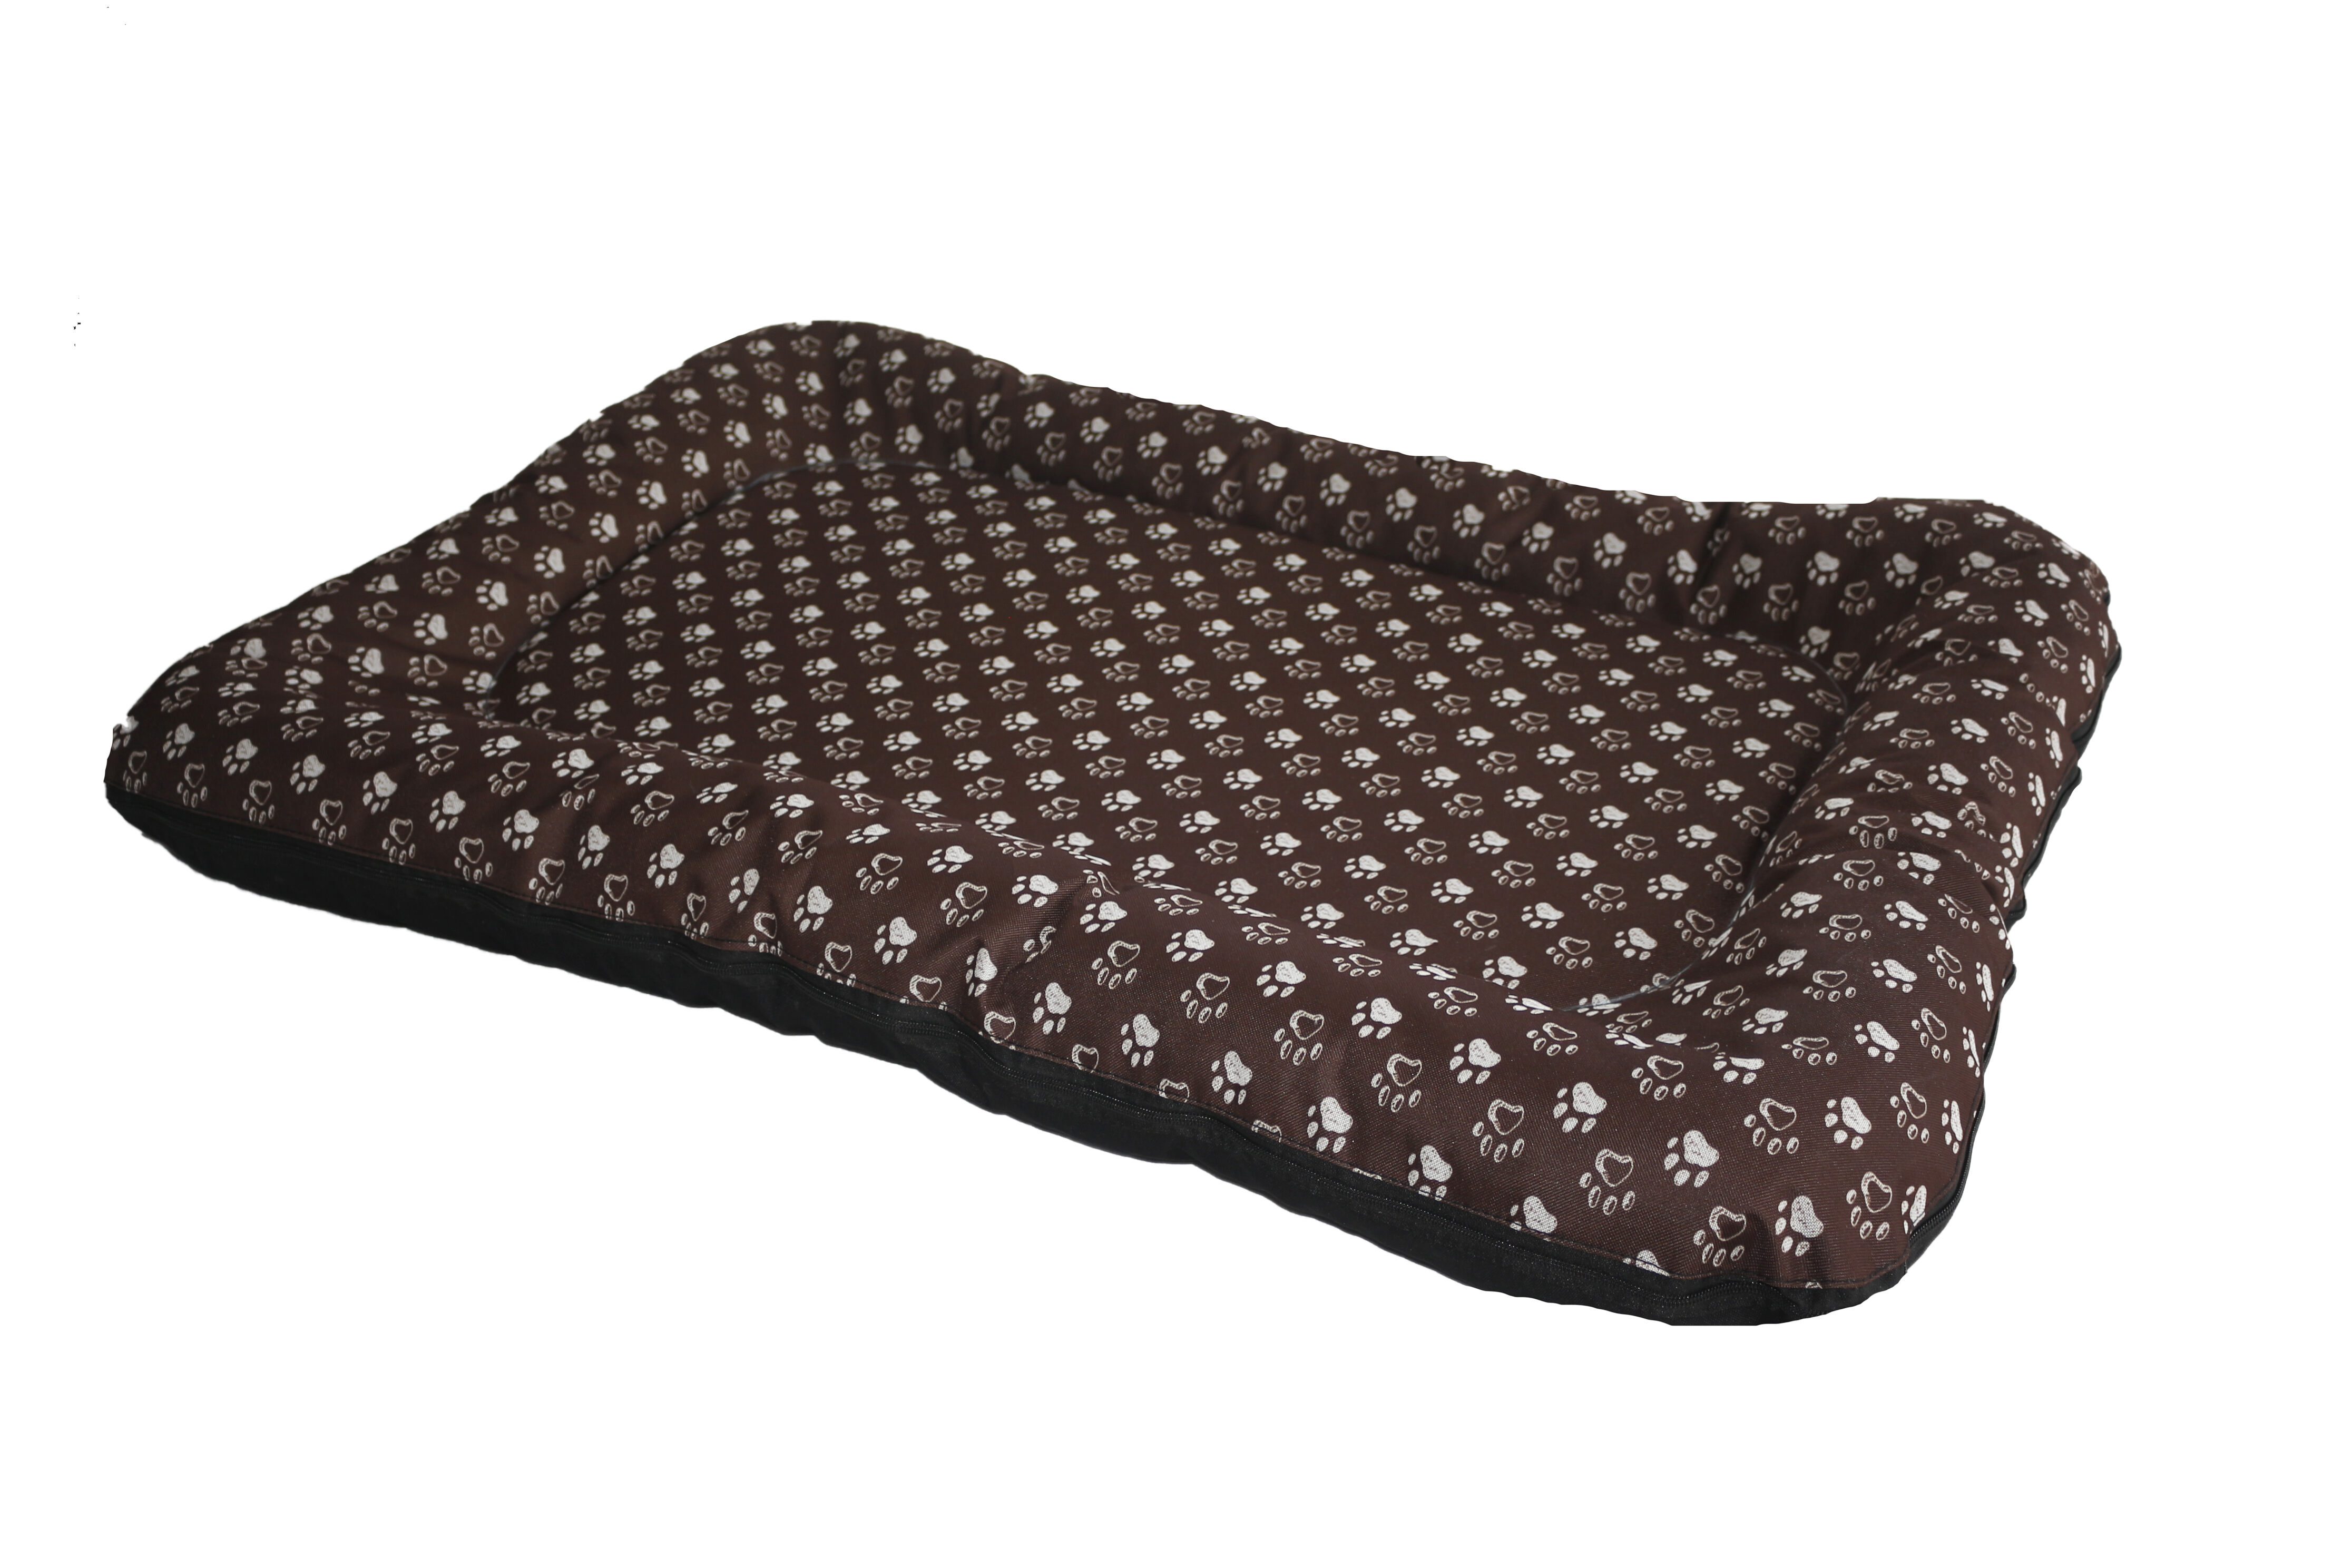 Rajen mattress for dogs, 6 sizes from 64x40 cm, motif P-24